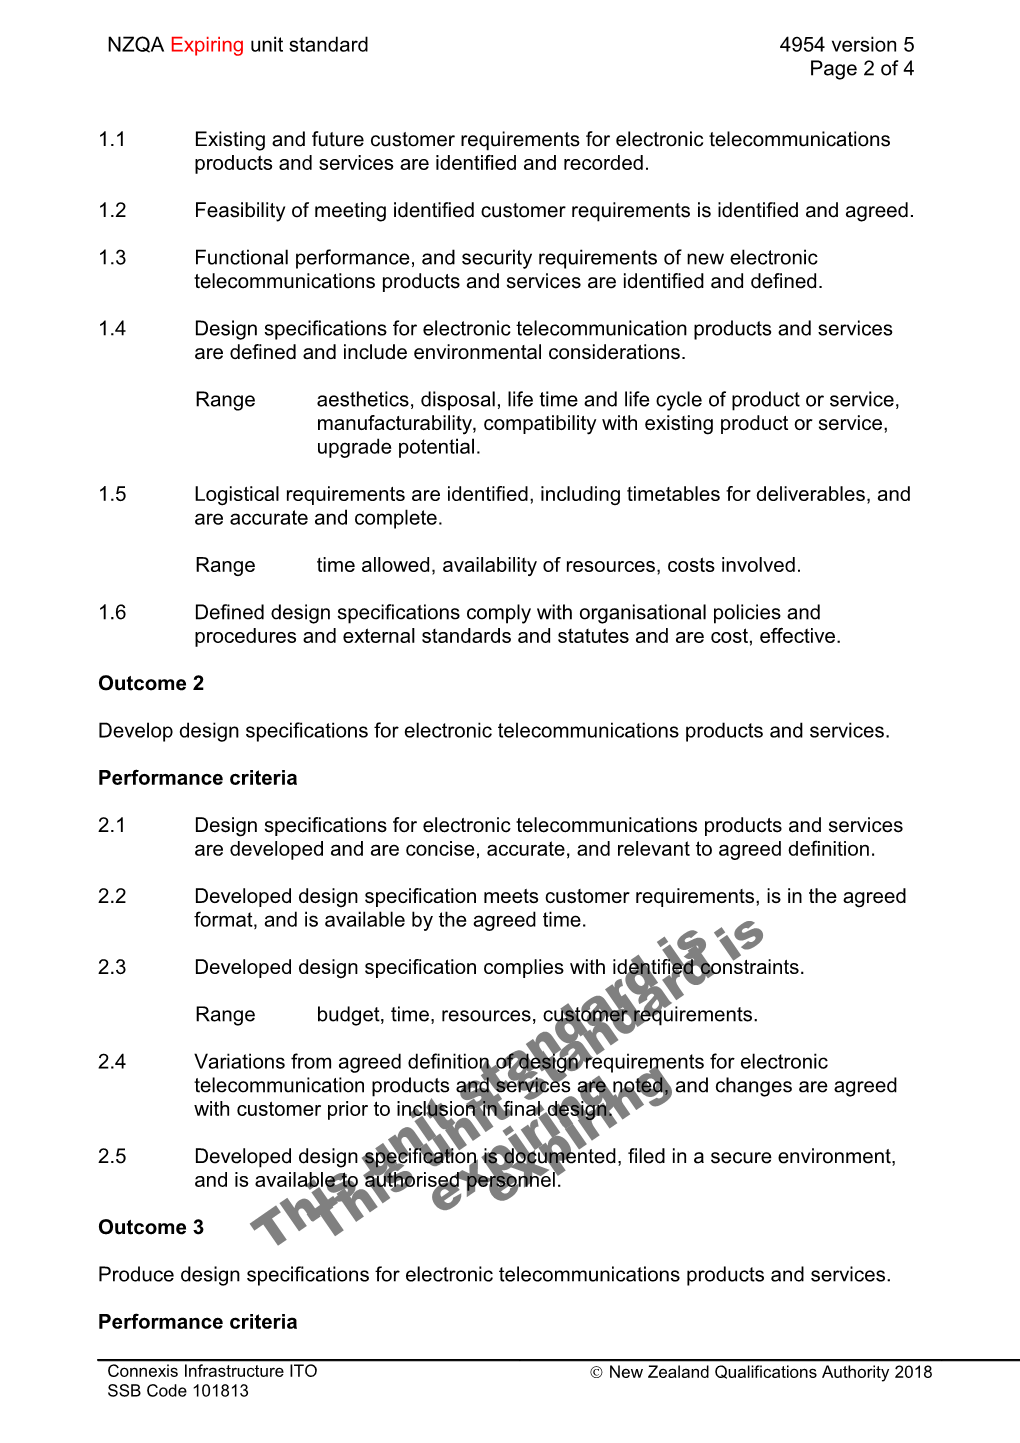 4954 Define and Produce Design Specifications for New Electronic Telecommunication Products